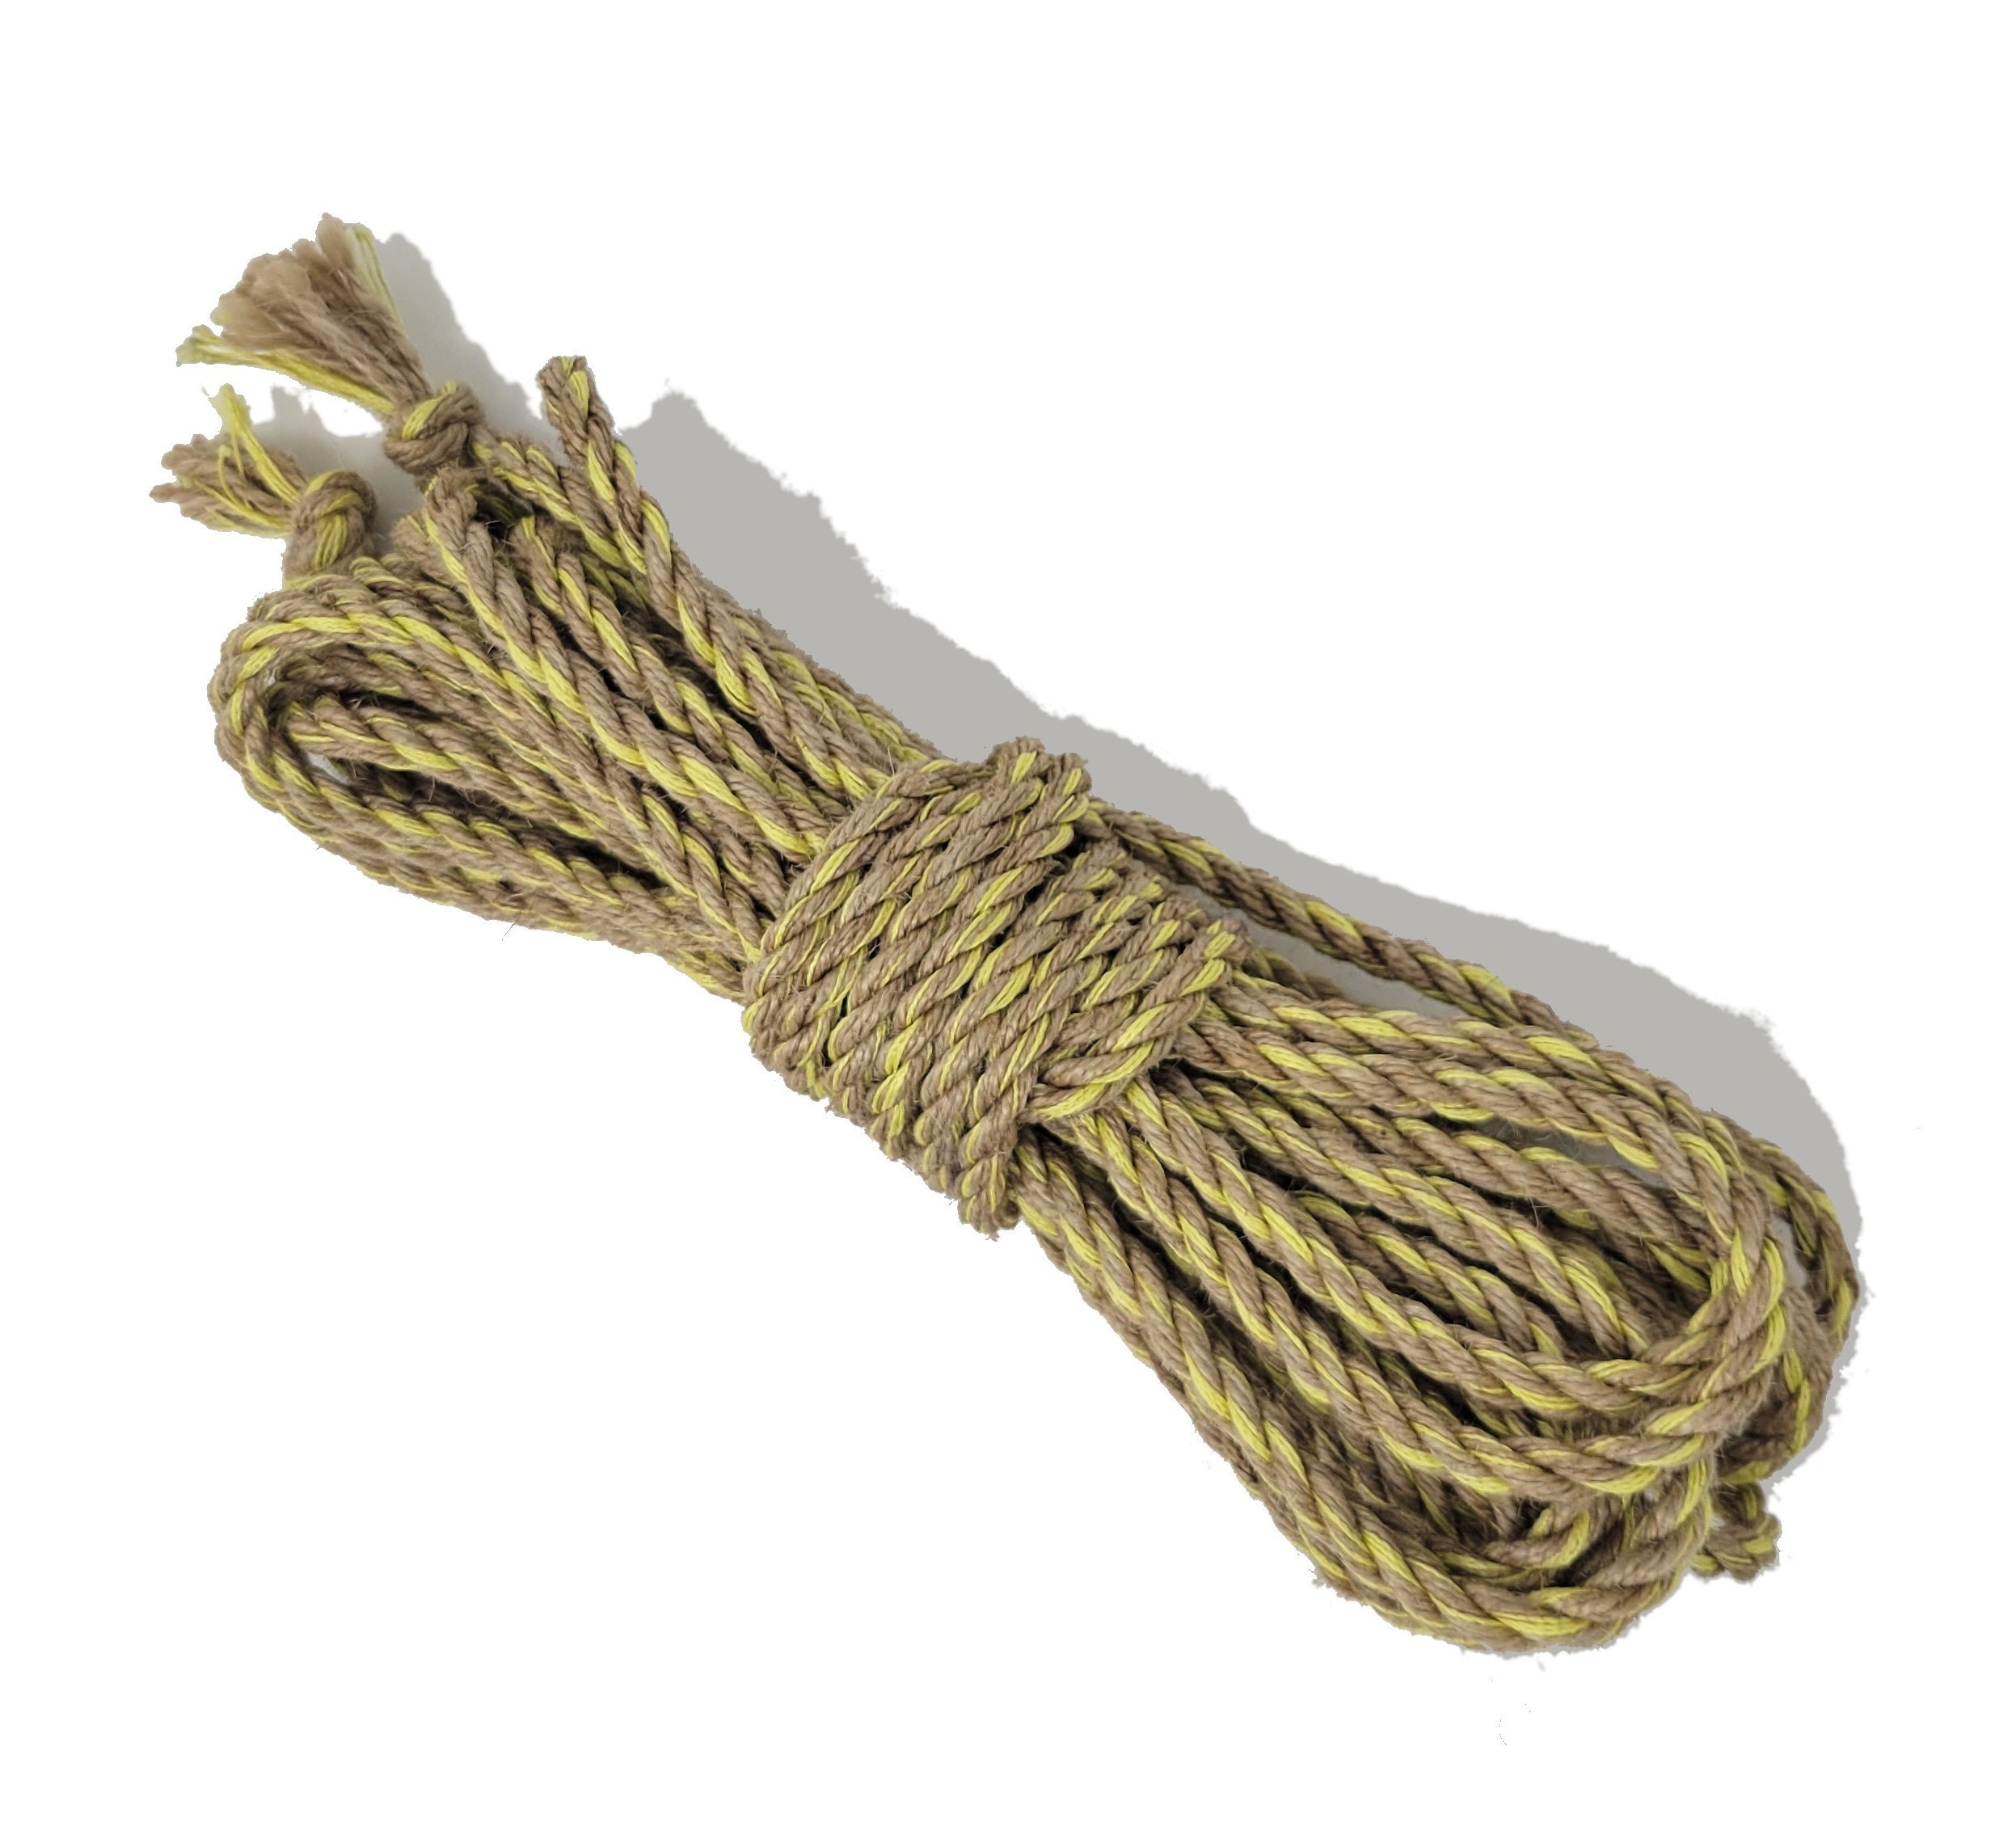 100% Natural Strong Jute Rope 100 Feet 12mm 4 Ply Hemp Rope All Purpose Cord for